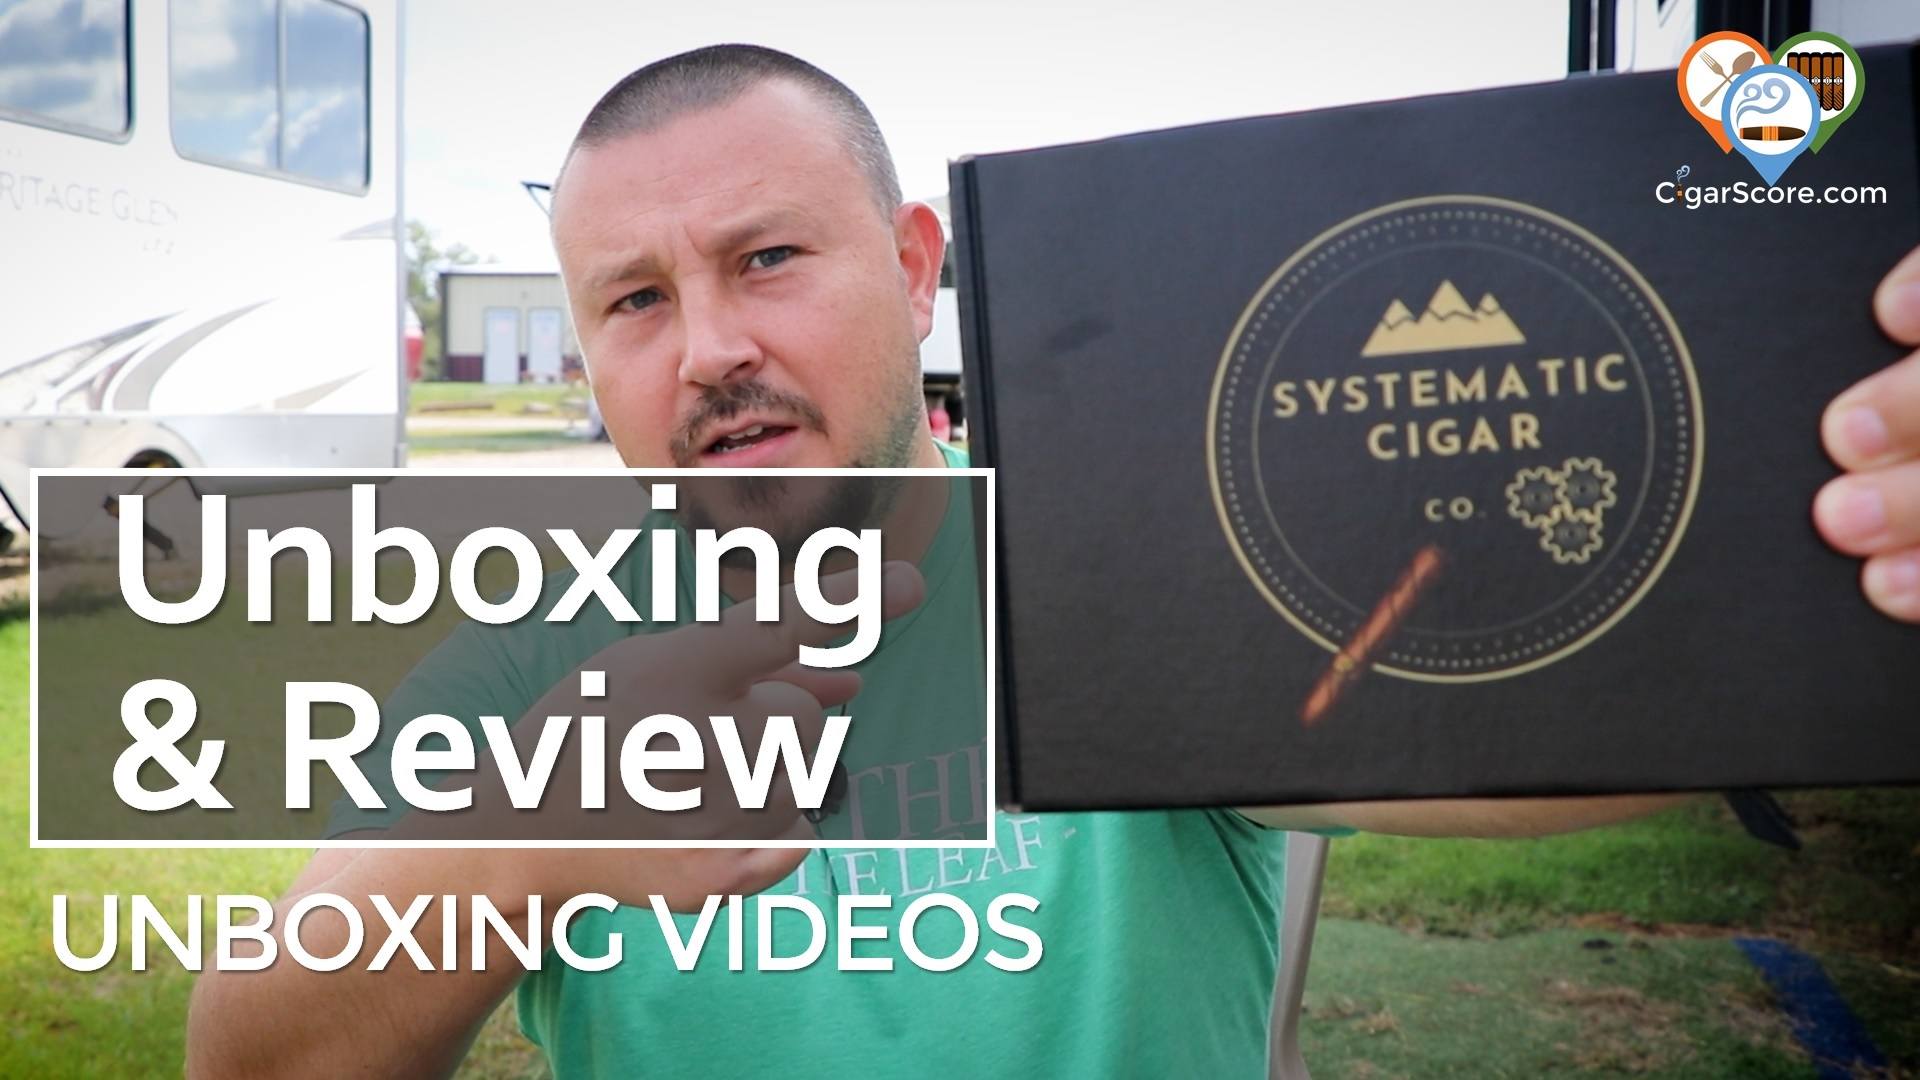 UNBOXING – Systematic Cigar Co